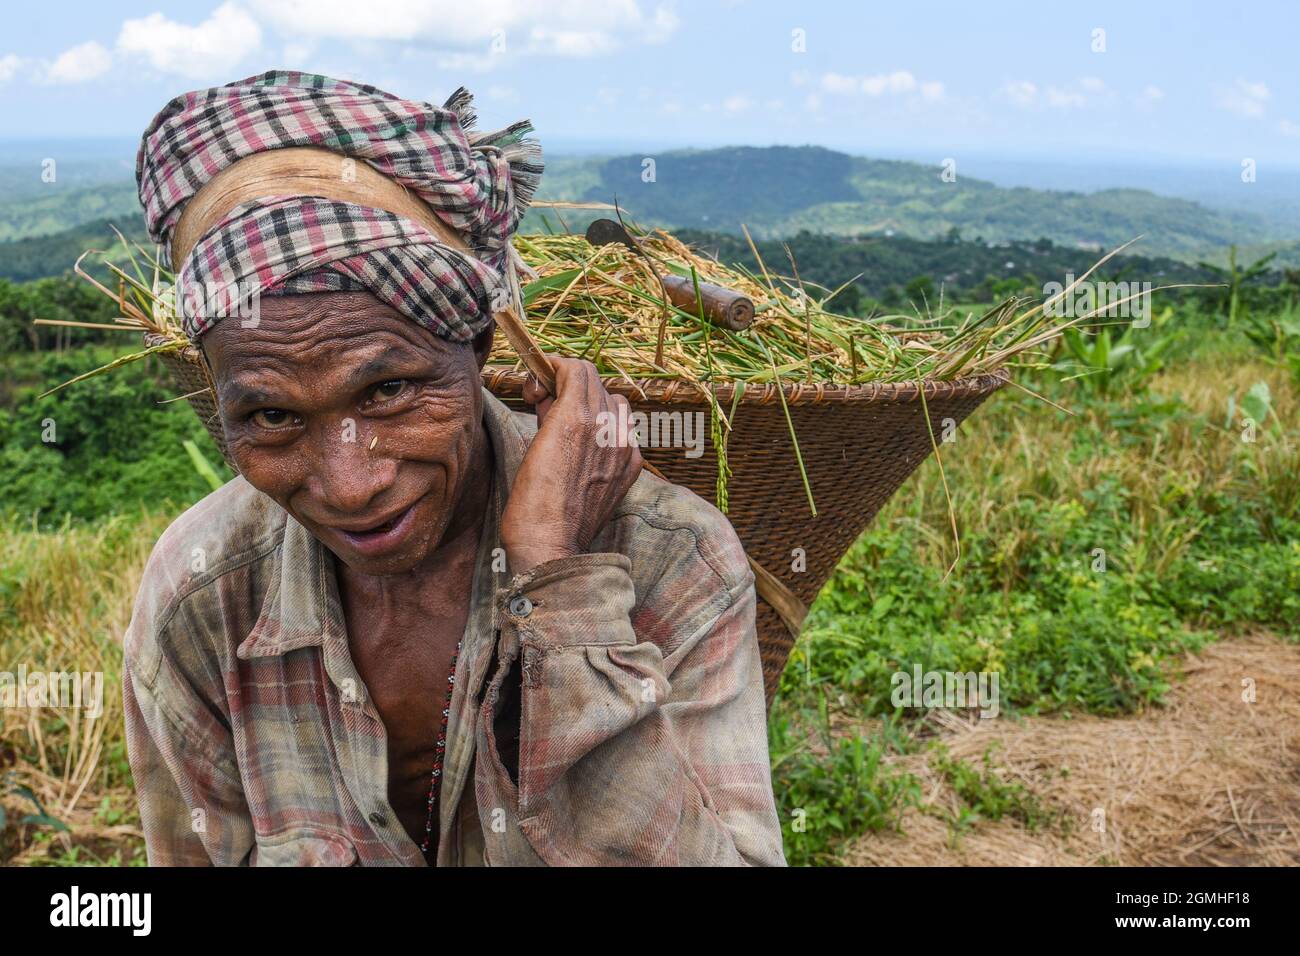 A man works in a Jhum field (mixed cropping) in Khagrachari, Chittagong Hill Tracts, Bangladesh Stock Photo